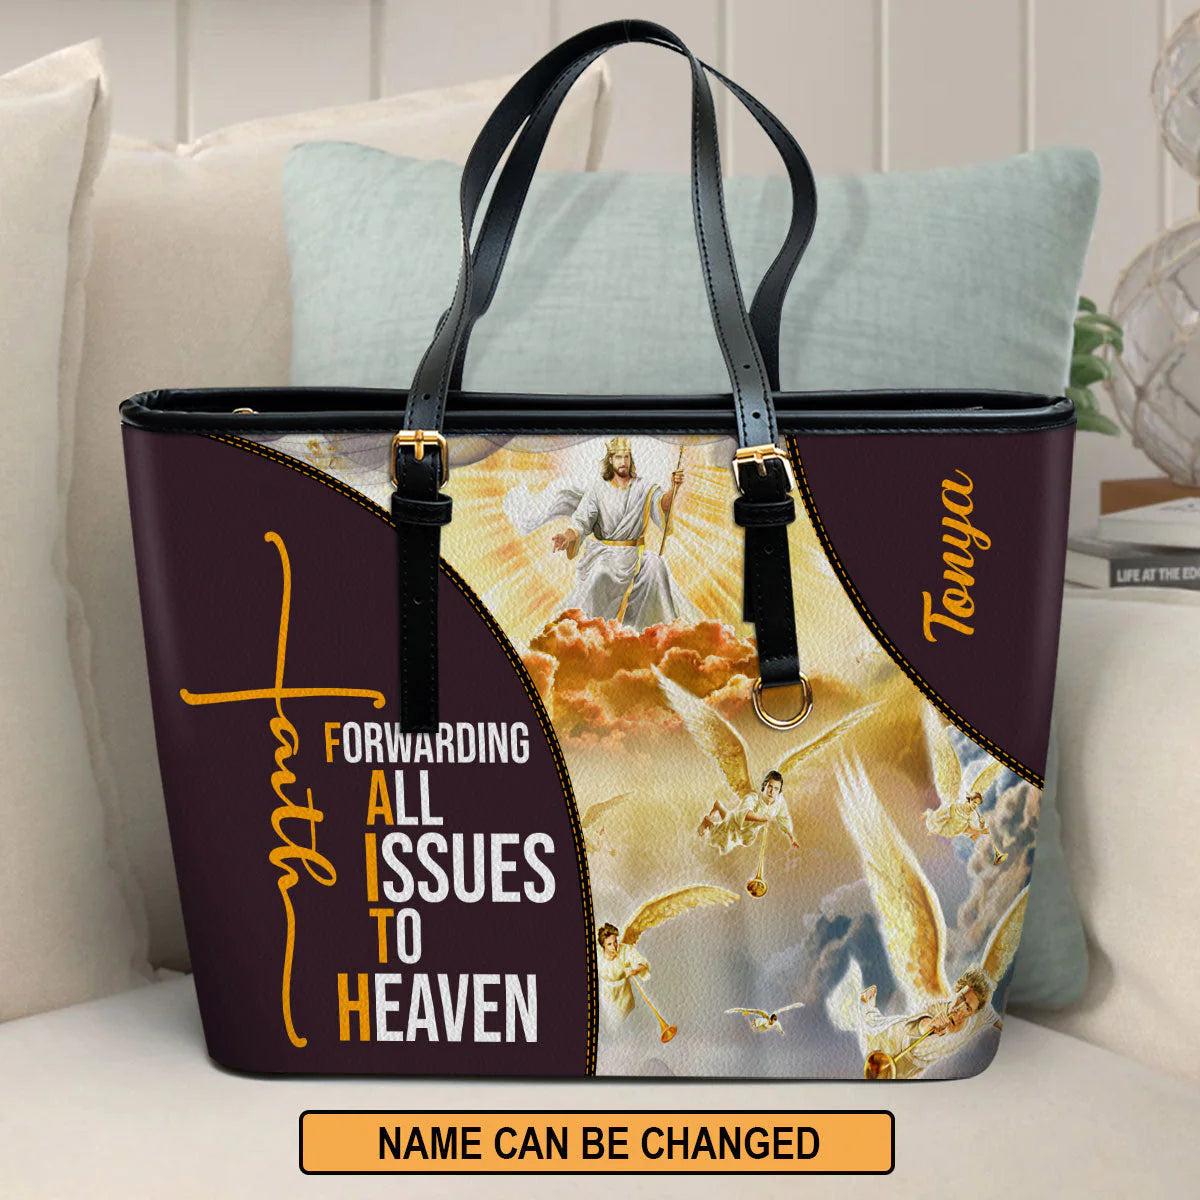 Christianartbag Handbag, Forwarding All Issues To The Heaven, Personalized Gifts, Gifts for Women, Christmas Gift. - Christian Art Bag